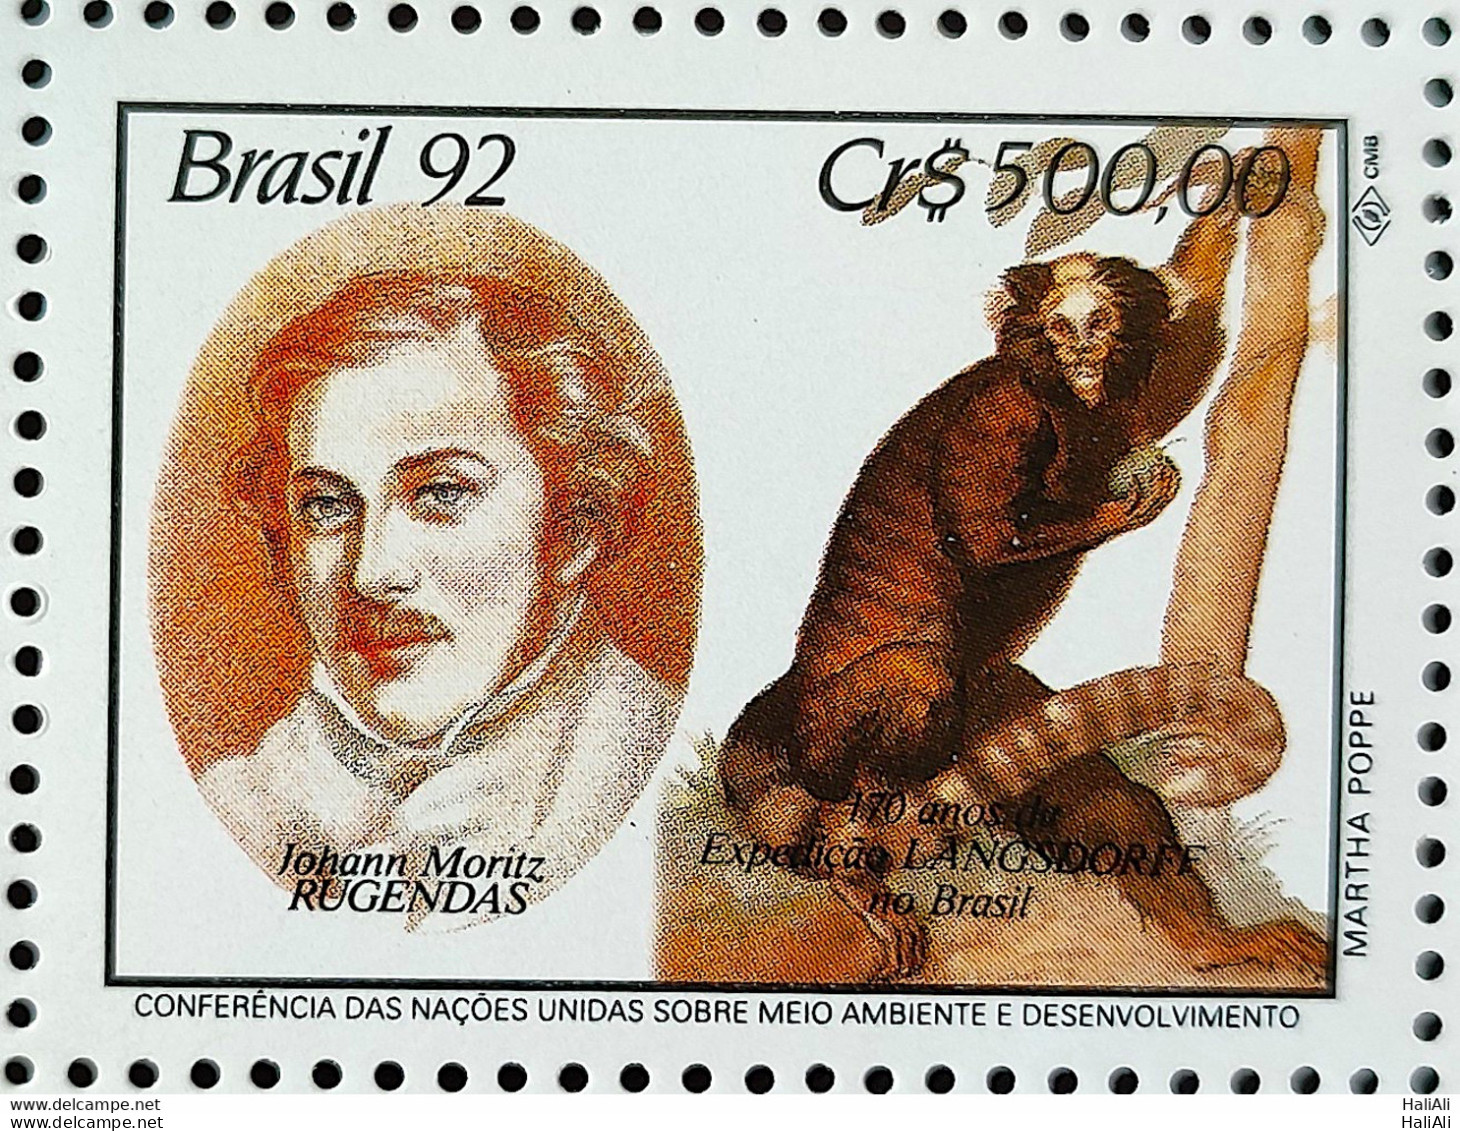 C 1794 Brazil Stamp Expedition Longsdorff Environment Florence Flora 1992 Complete Series - Neufs